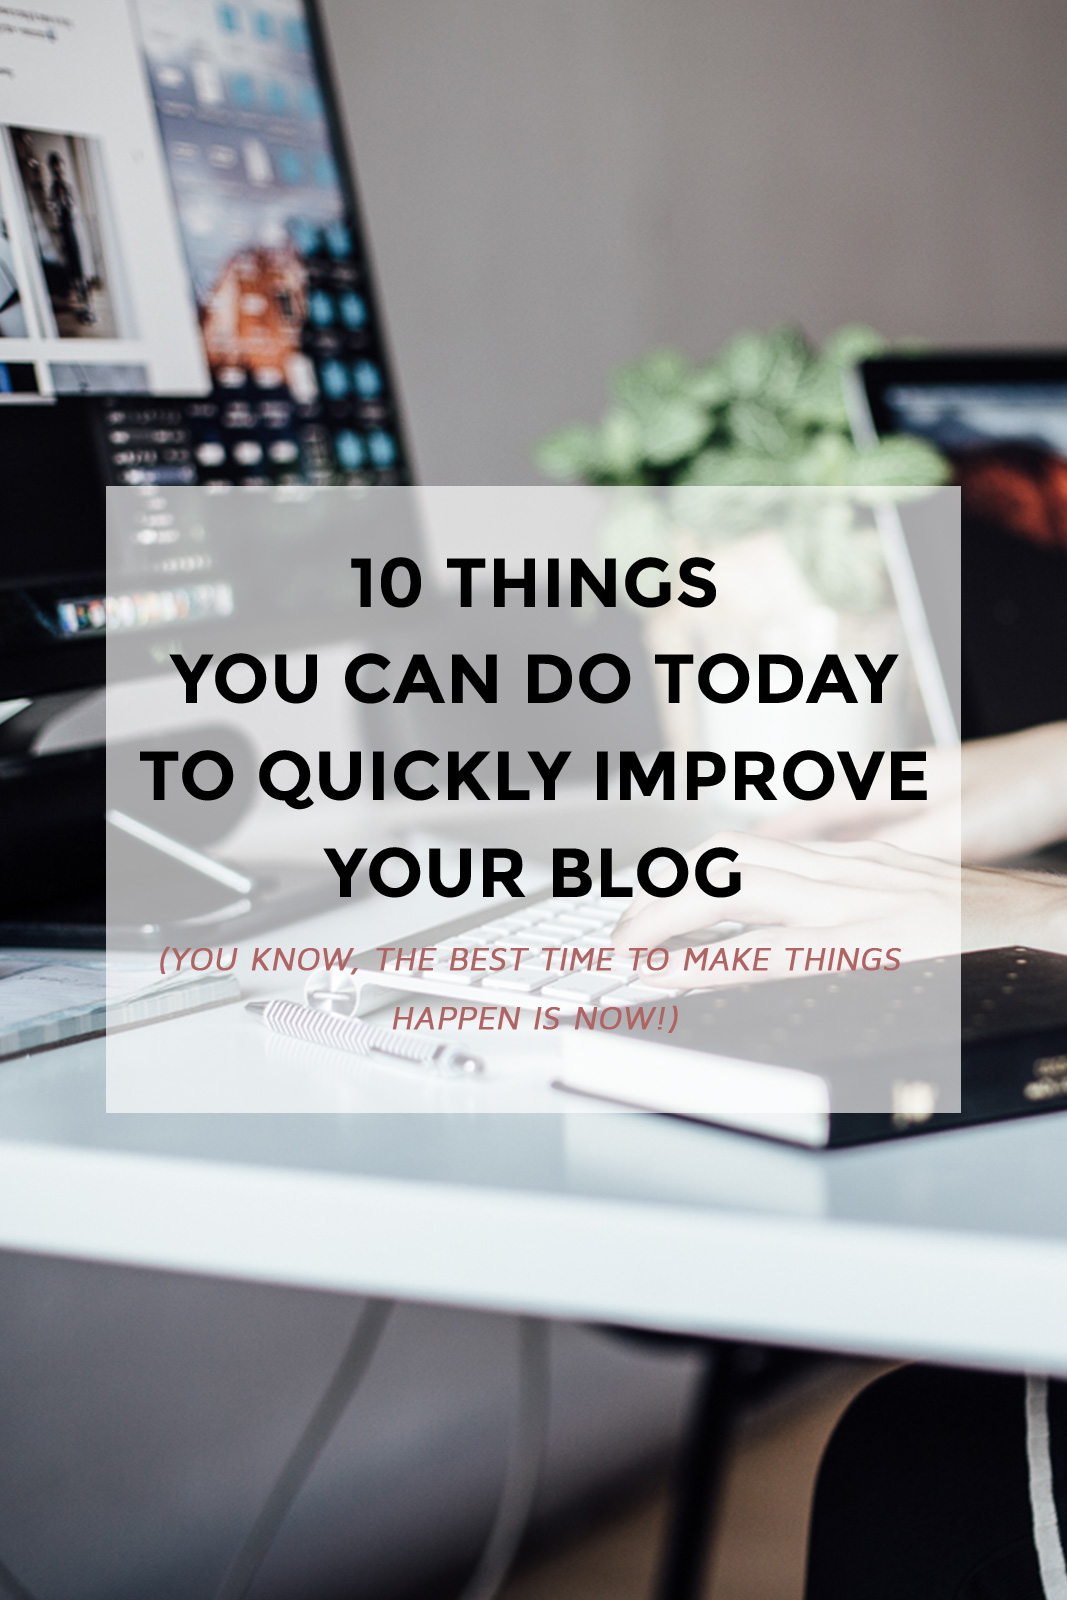 Look, the best time to start making things happen is now. If you feel like you're having a bad week or your blog is not growing as fast as you'd love to- you can still turn things around. Follow these 10 tips to quickly improve your blog & see your blog blossom to its full potential! (blogging tips, freelance blogging, blog improvement, blogging 101)